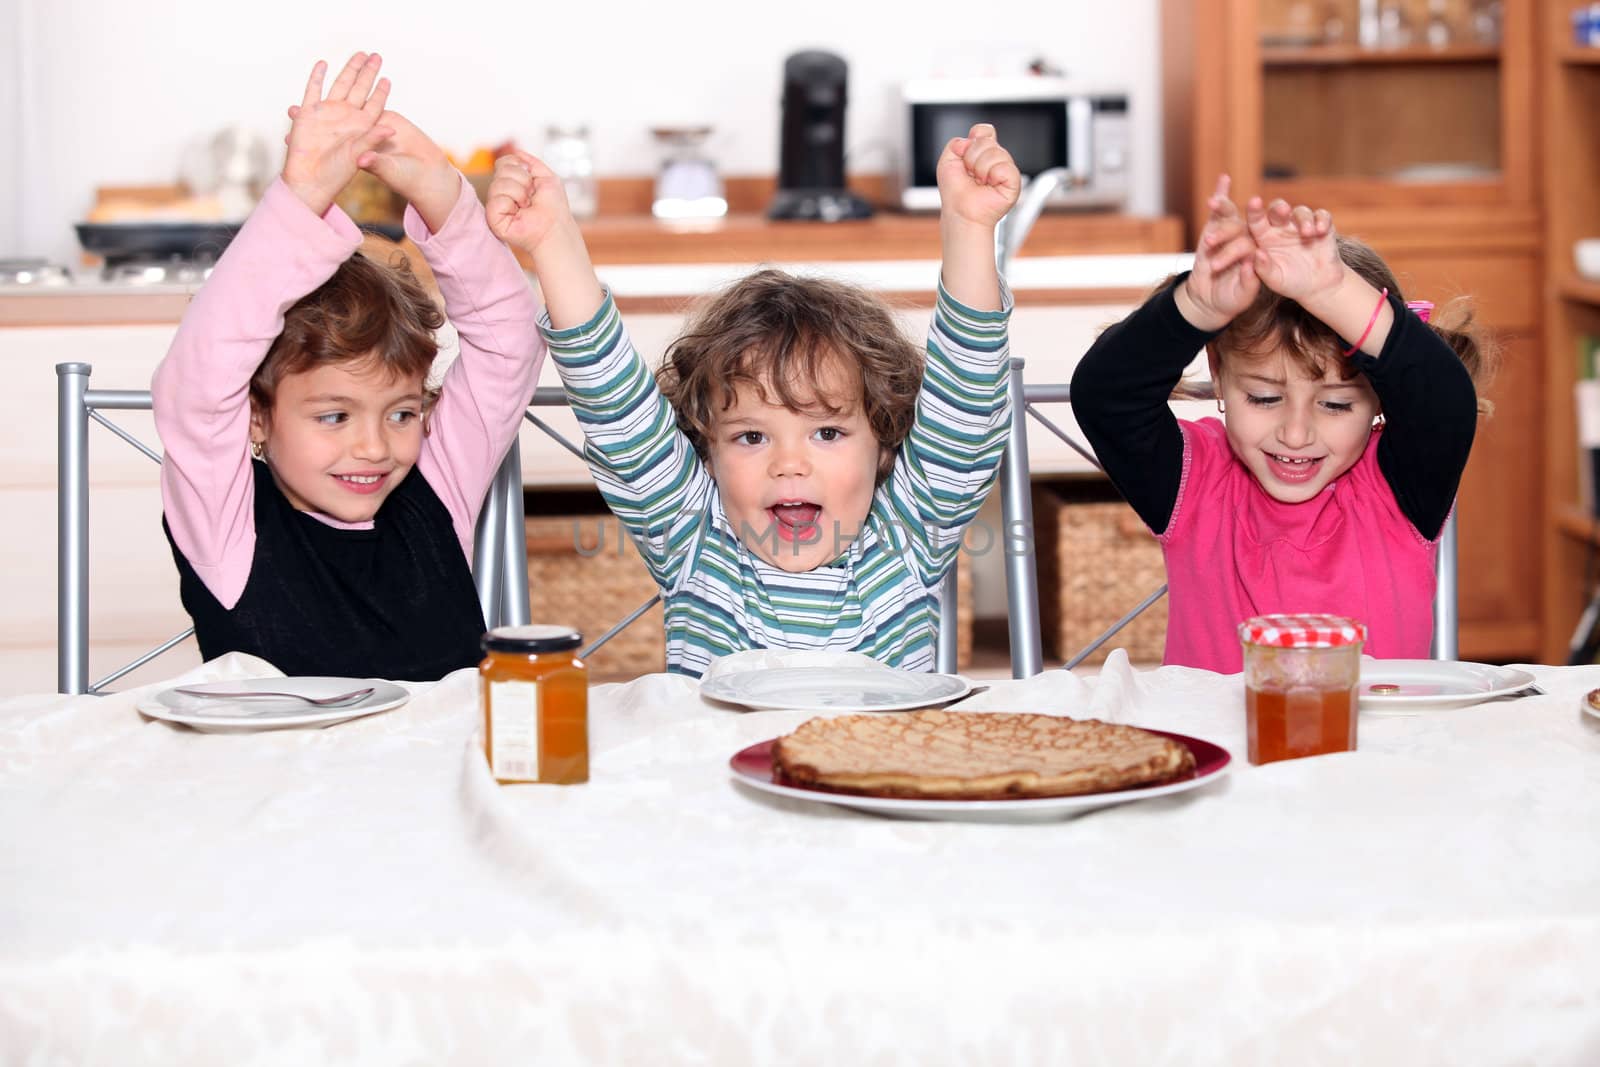 Kids excited by pancakes